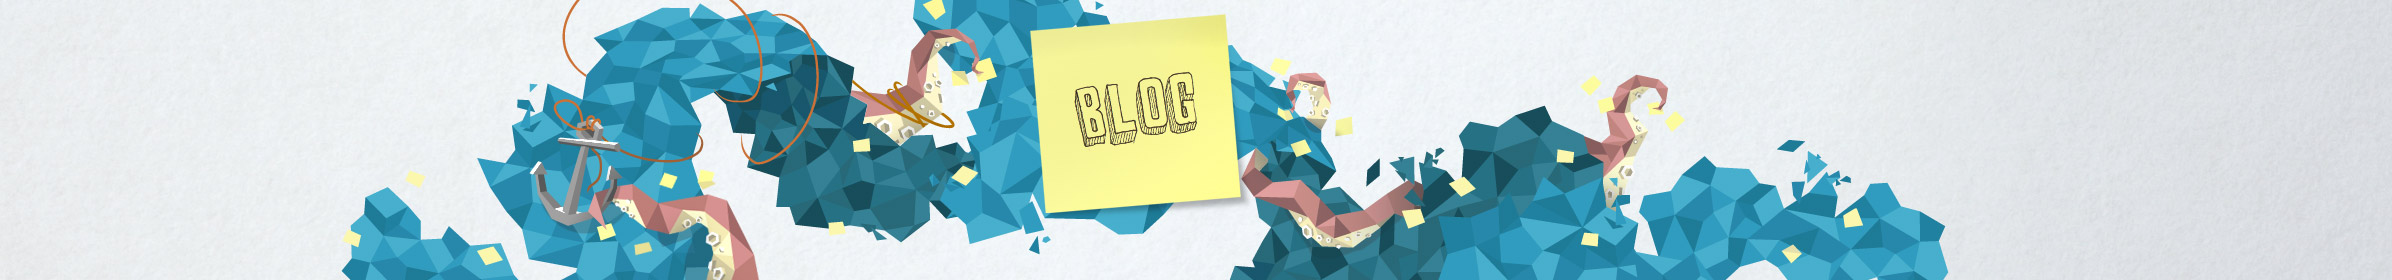 Freelance design and illustration blog written by Andi Best